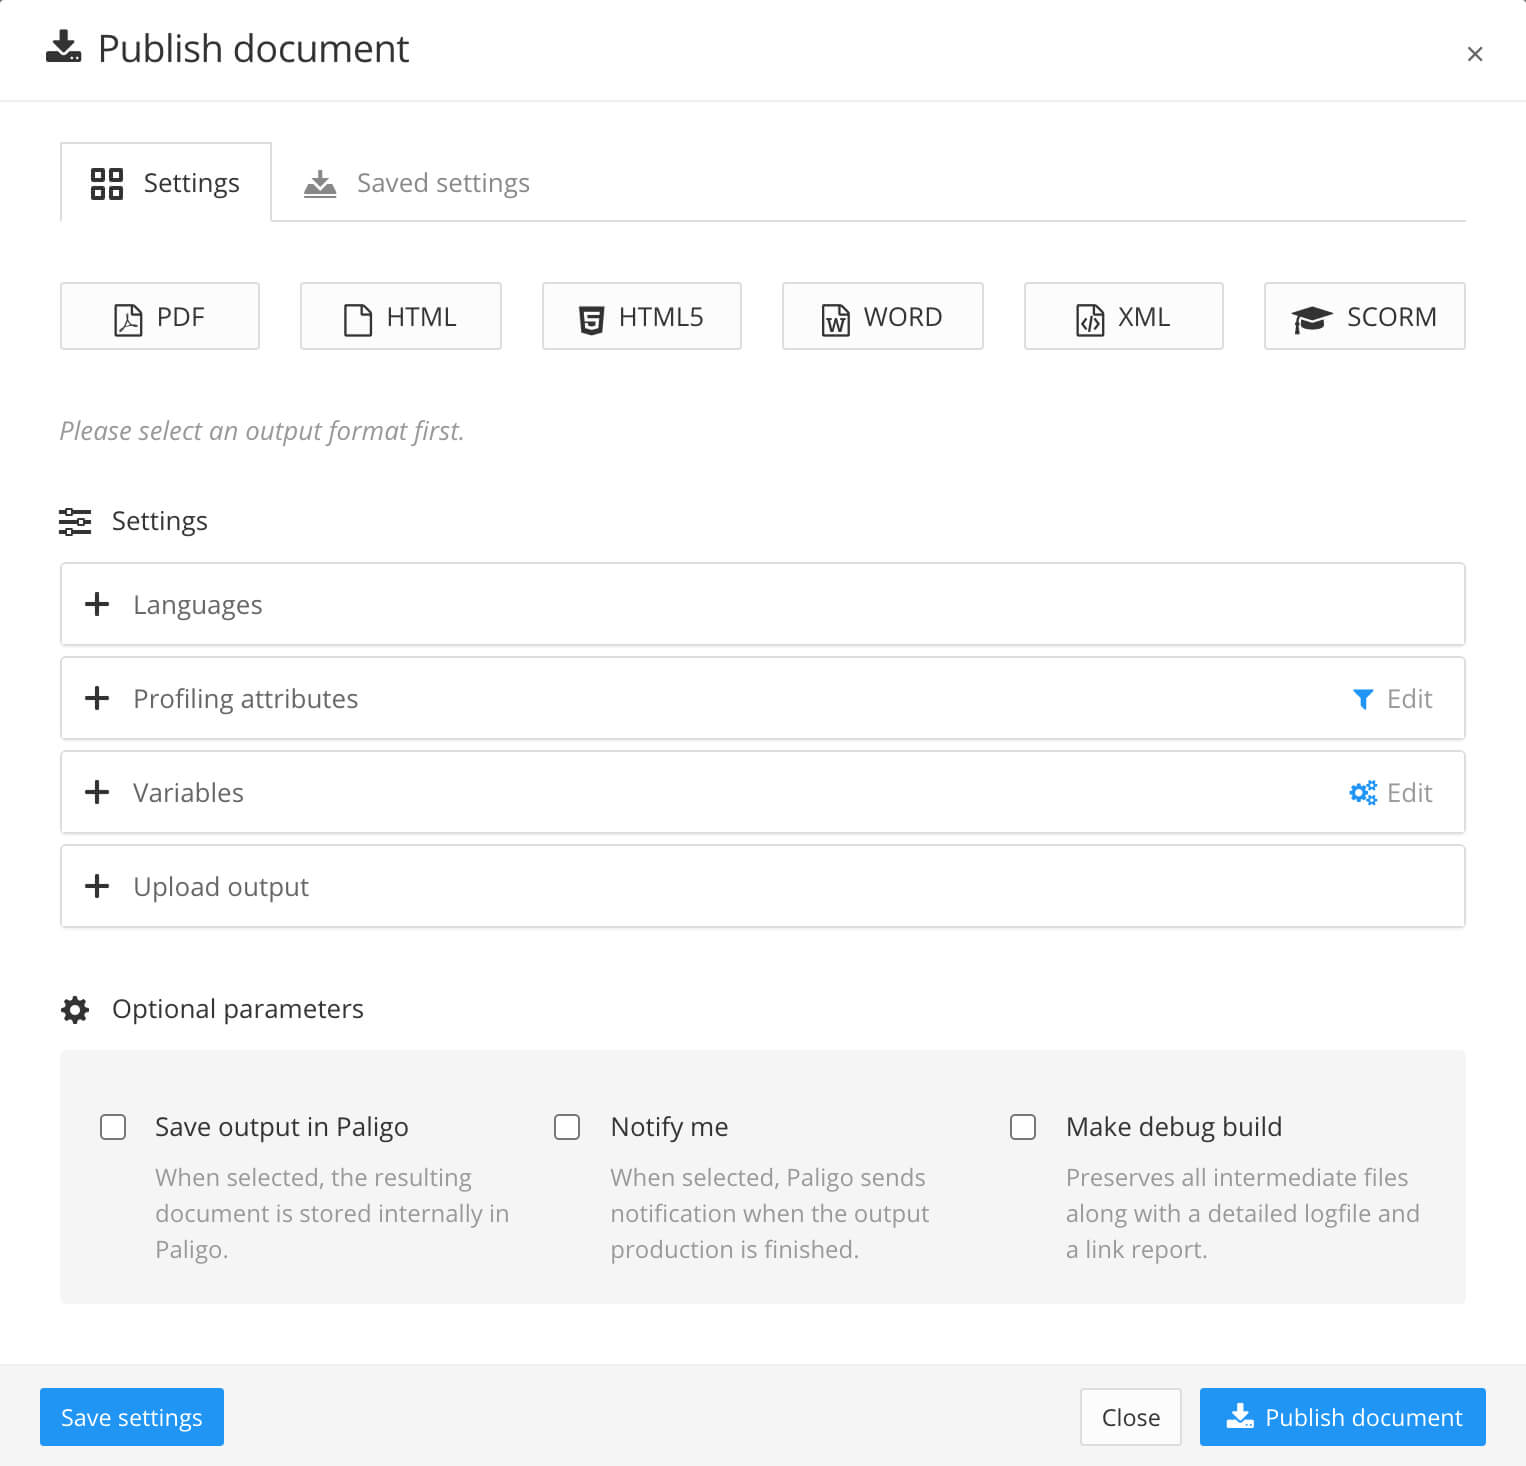 Publish document dialog. It has settings for defining the type of output, the language, filtering, variables, and uploading output to repositories.